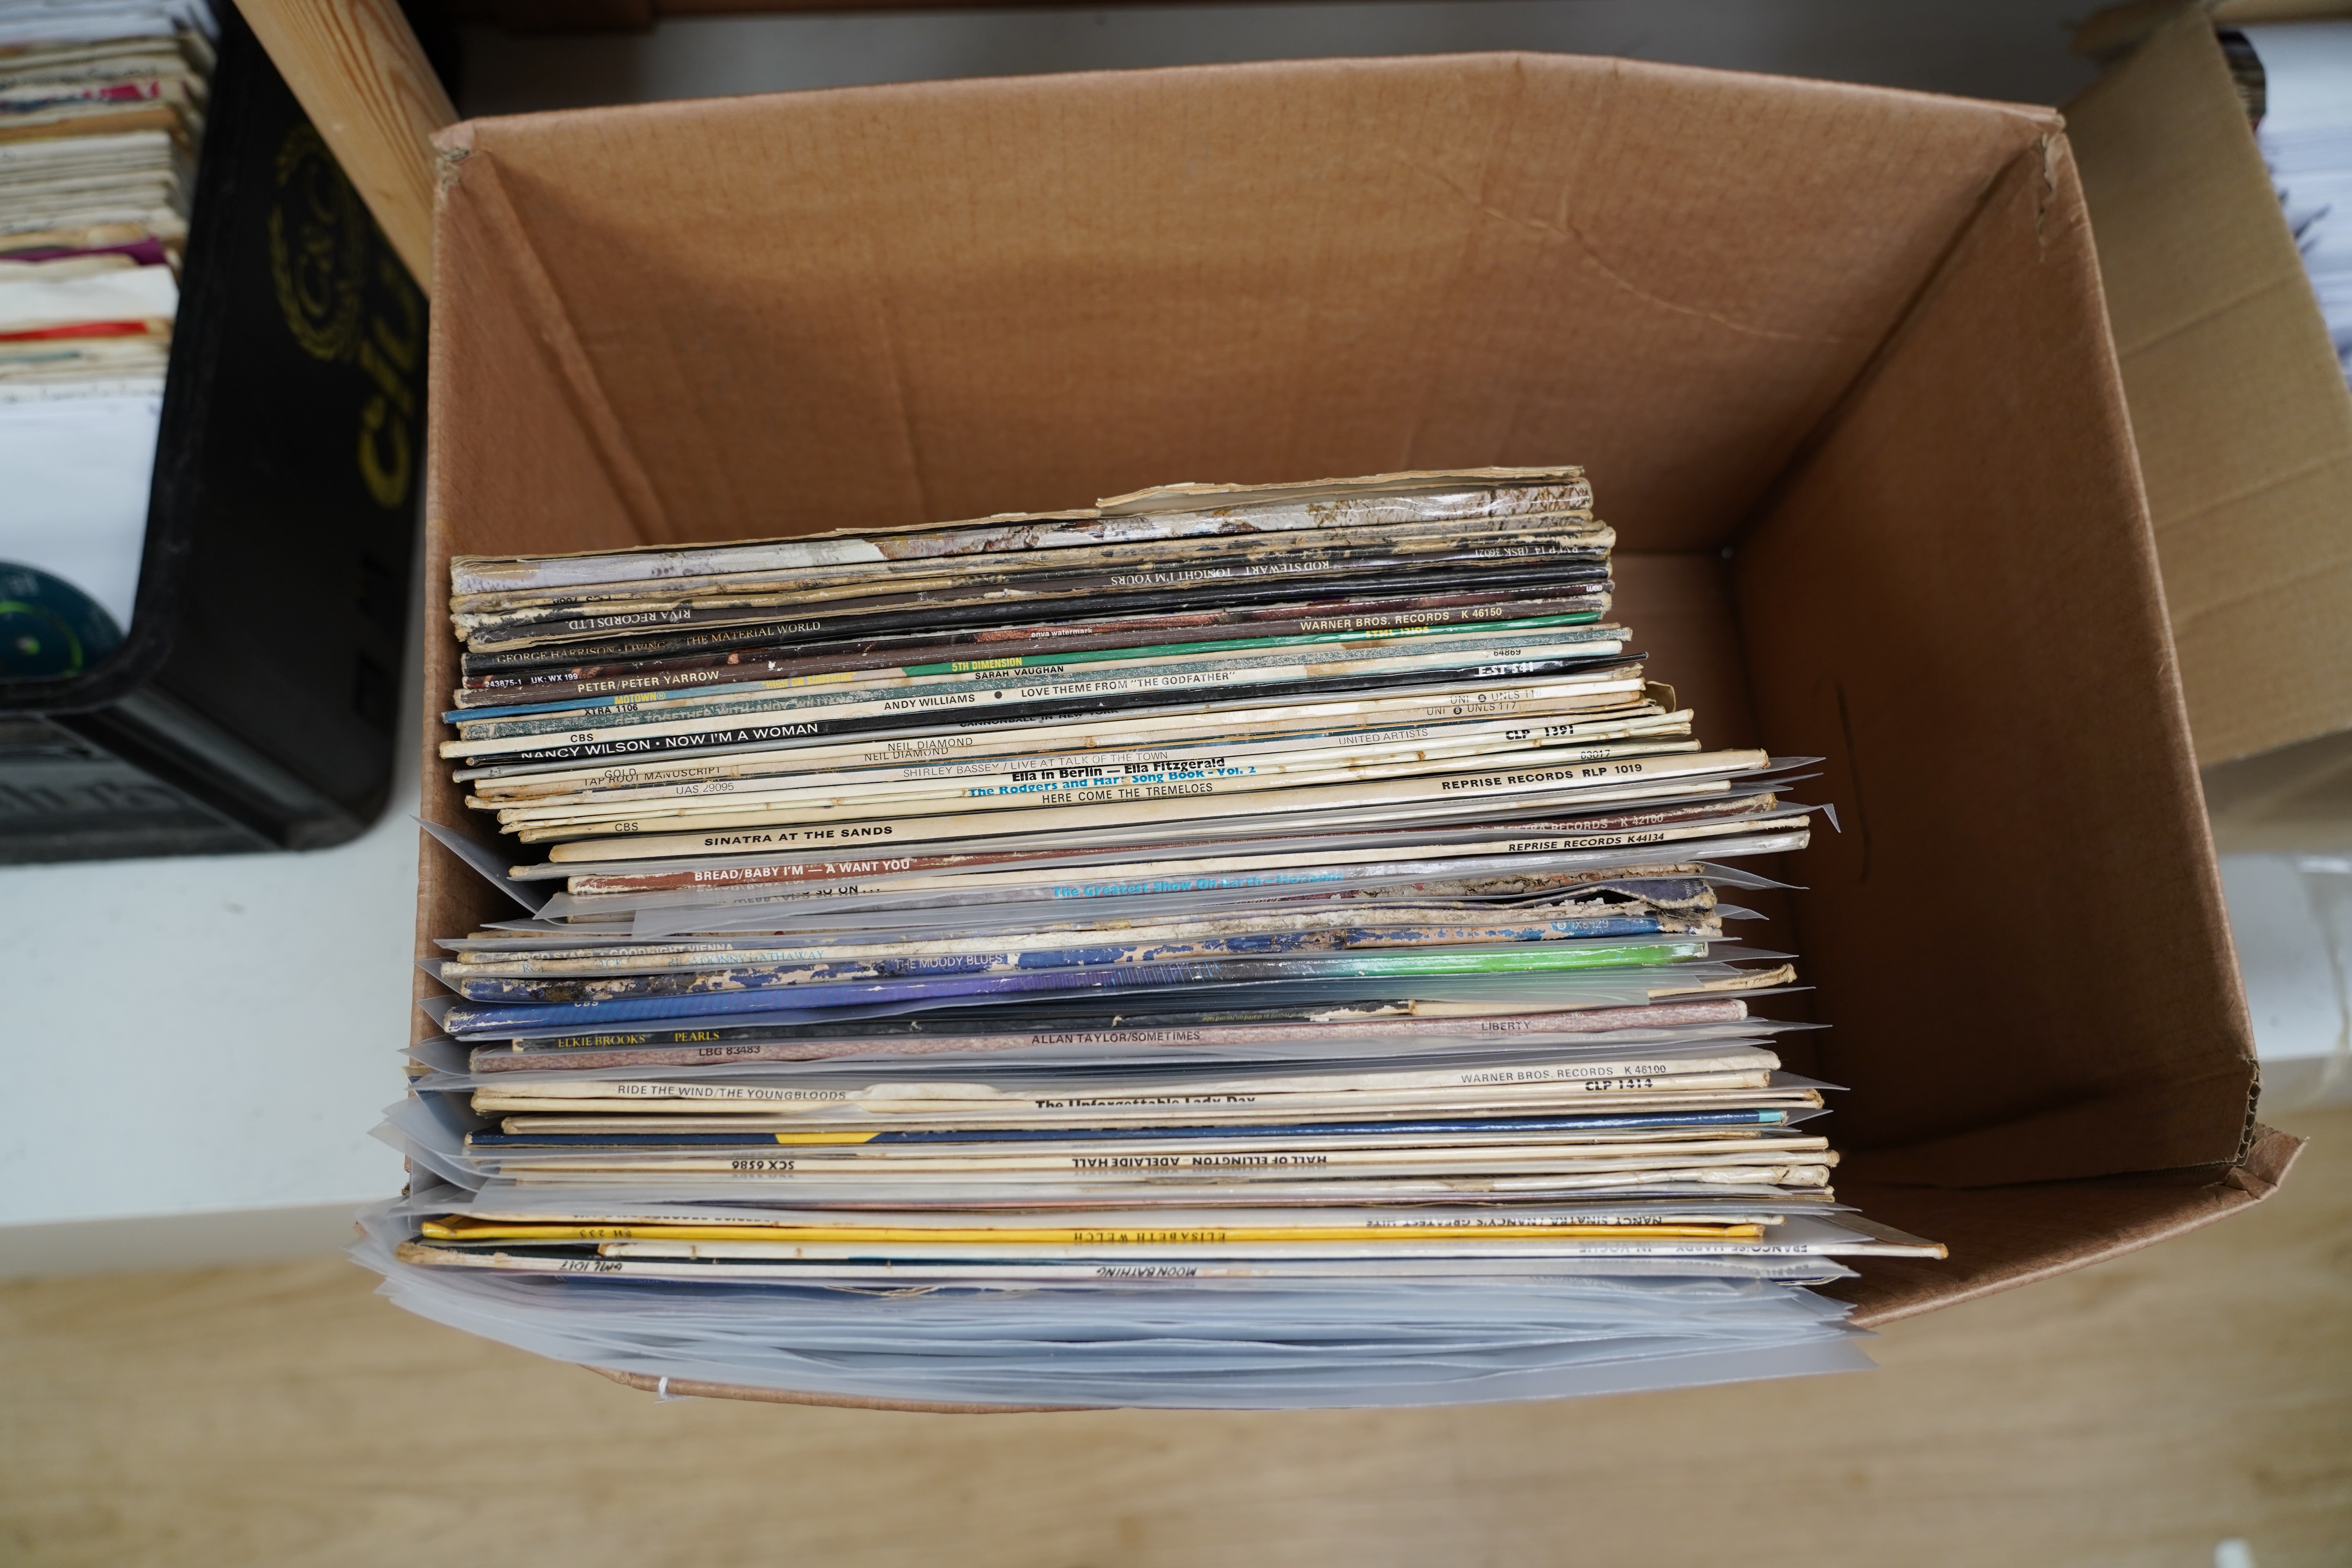 A box of LP record albums, artist including; Neil Diamond, Shirley Bassey, Ella Fitzgerald, Billie Holiday, Ringo Starr, Dionne Warwick, etc., many LPs missing covers or with only the remains of covers, some covers witho